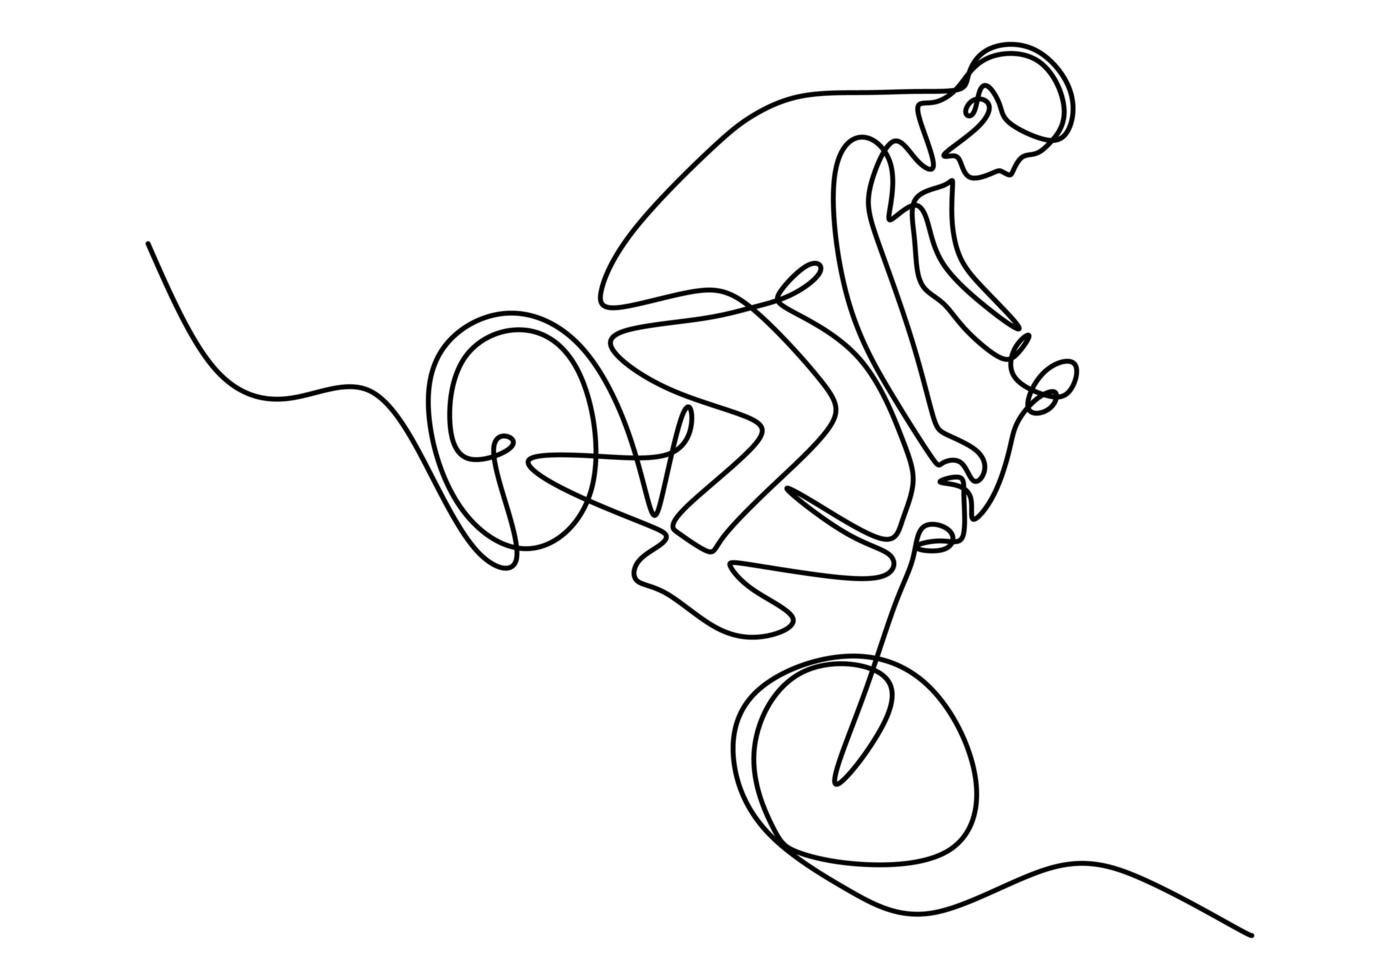 Single continuous line drawing of young cycle rider show freestyle extreme risky trick. vector